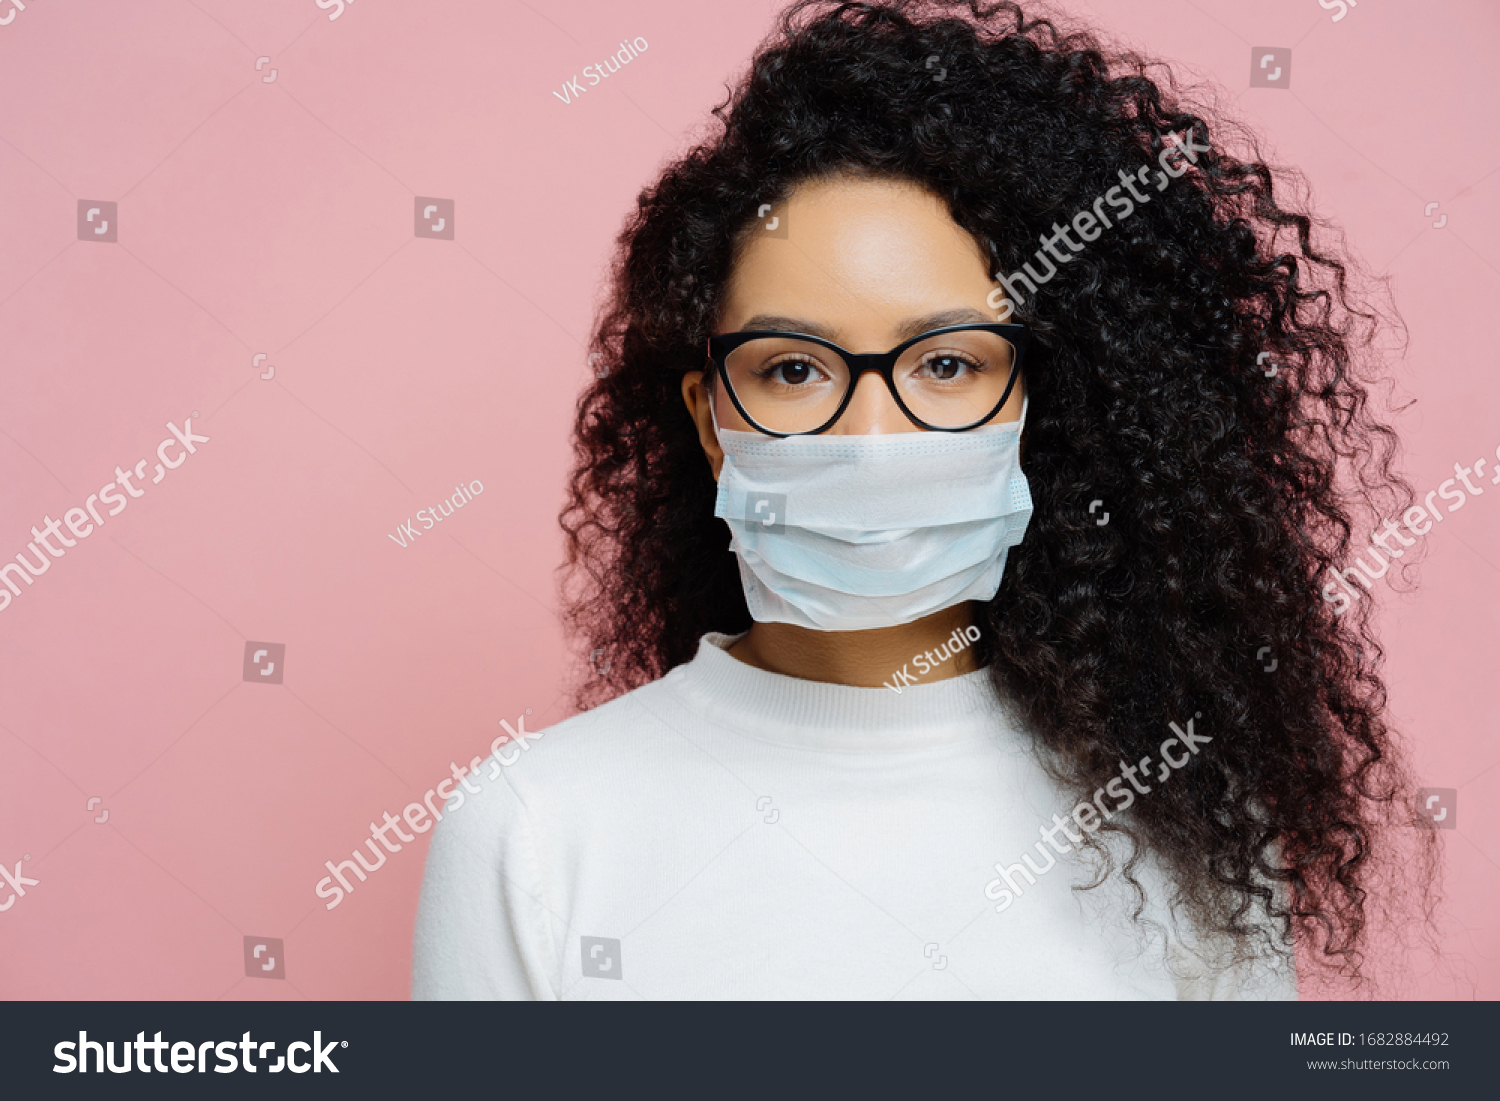 Covid-19, infectious virus. Close up shot of young woman with curly bushy hair, wears transparent glasses and medical disposable mask, cares about her health, protects in dangerious situation #1682884492